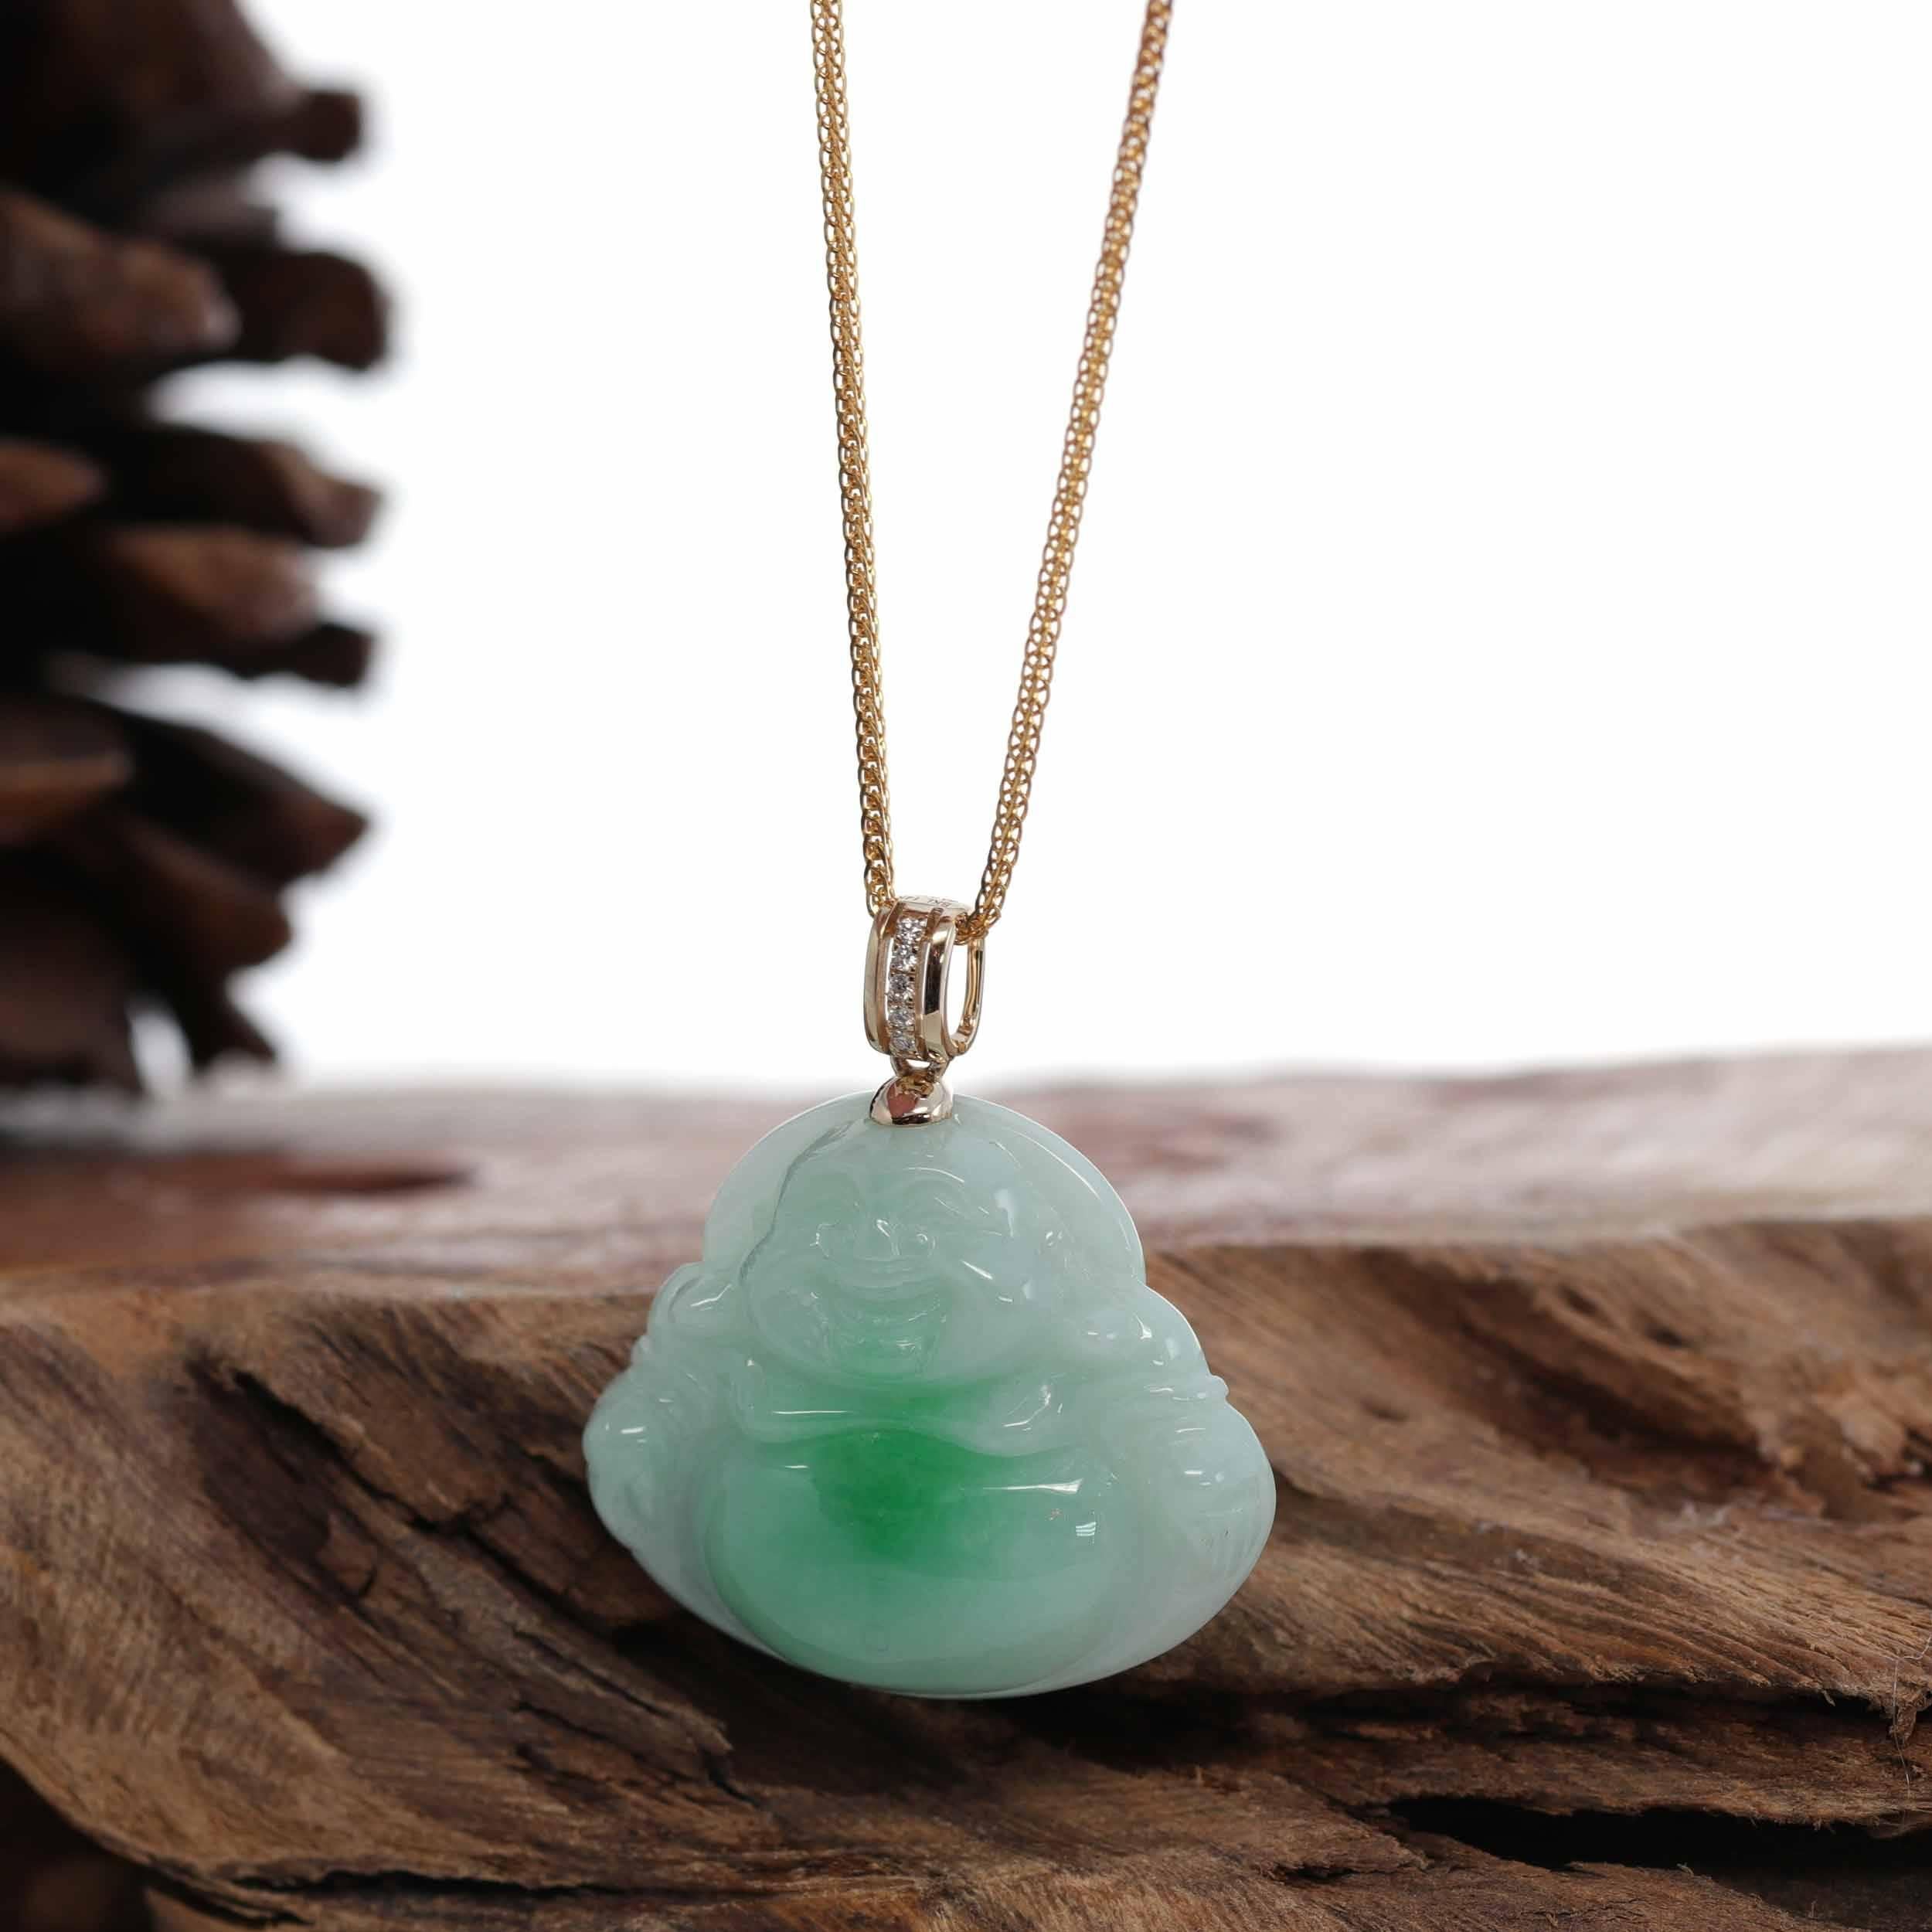 * Detail--- One-of-a-kind jadeite Buddha necklace, inspired by the figure of the traditional Buddha body. Combined with a modern diamond bail. The piece is more than perfect for daily wear. Wearing items bearing the image of Buddha can remind us to